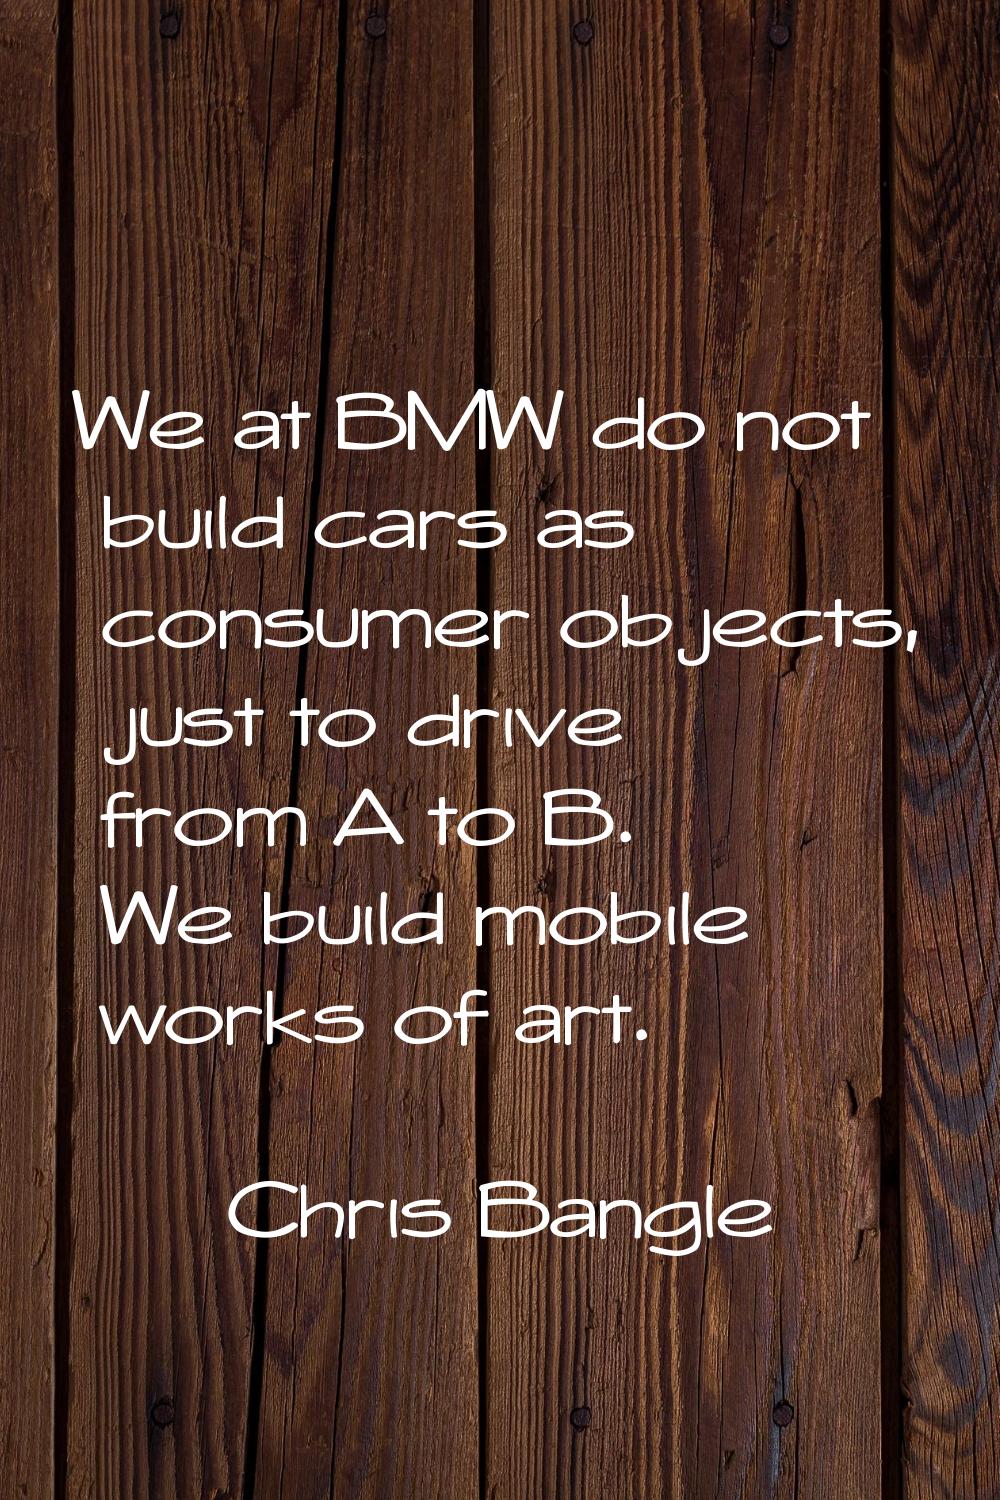 We at BMW do not build cars as consumer objects, just to drive from A to B. We build mobile works o